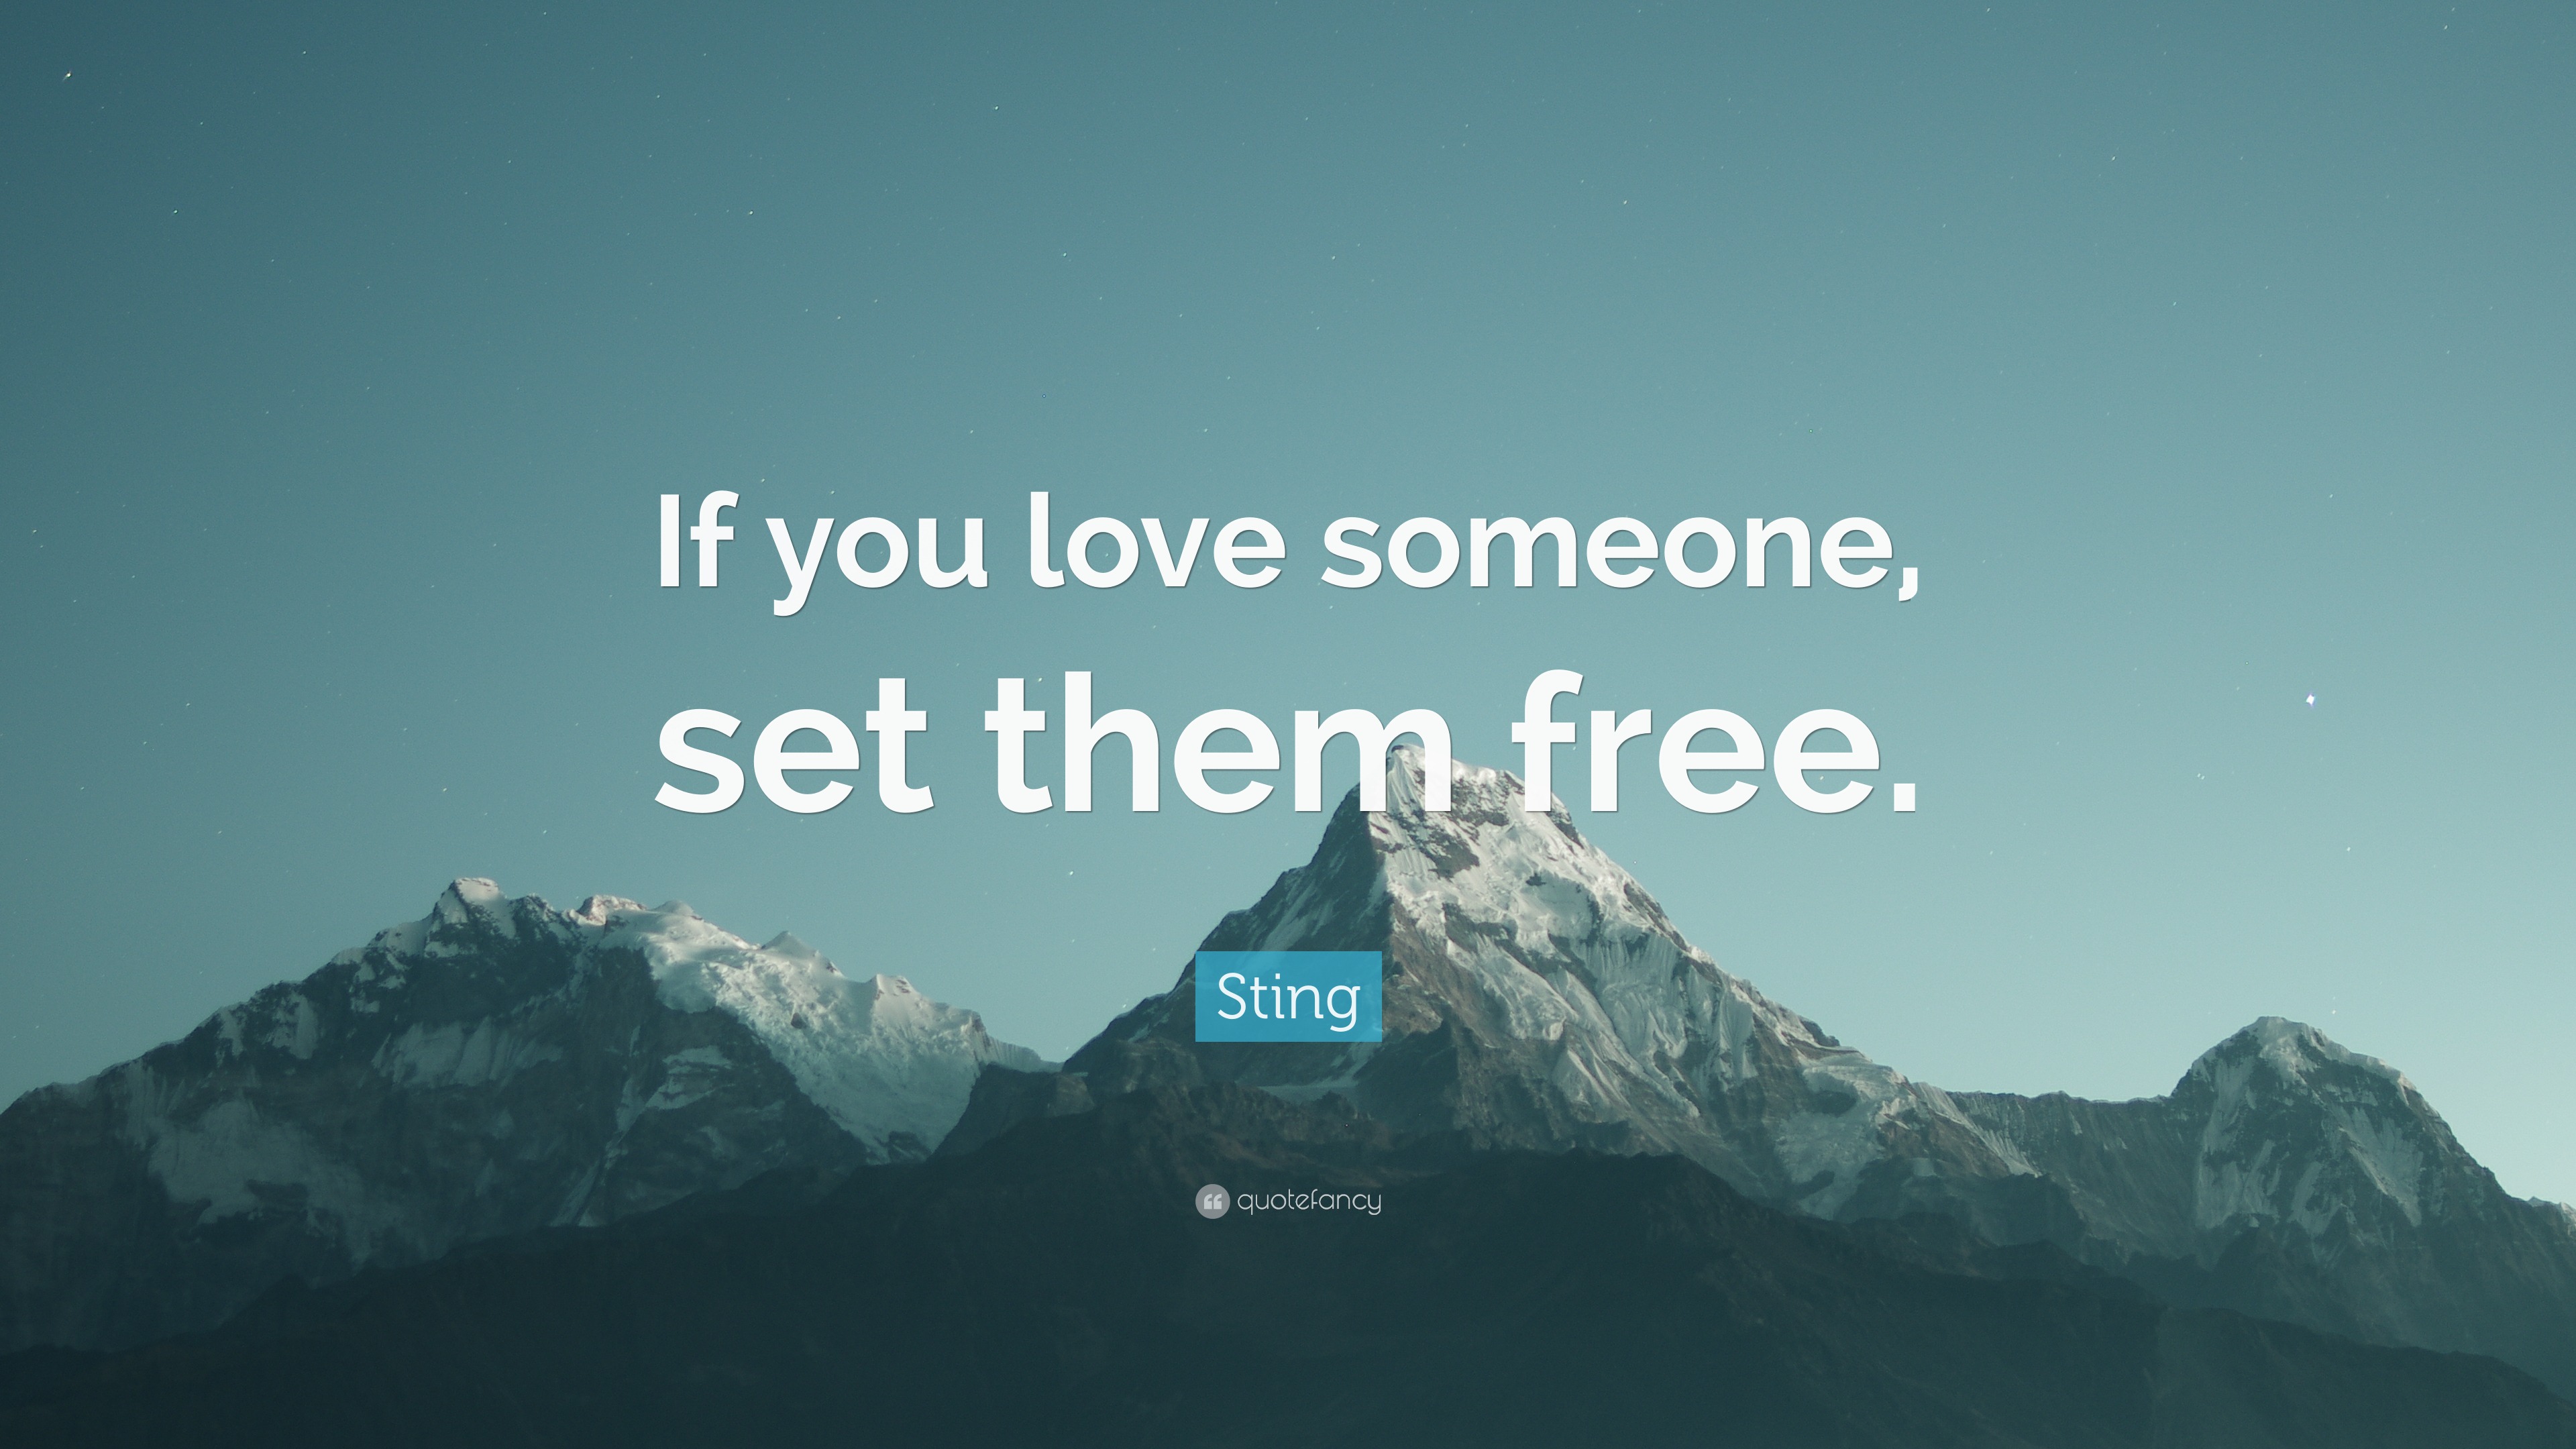 Sting Quote “If you love someone set them free ”